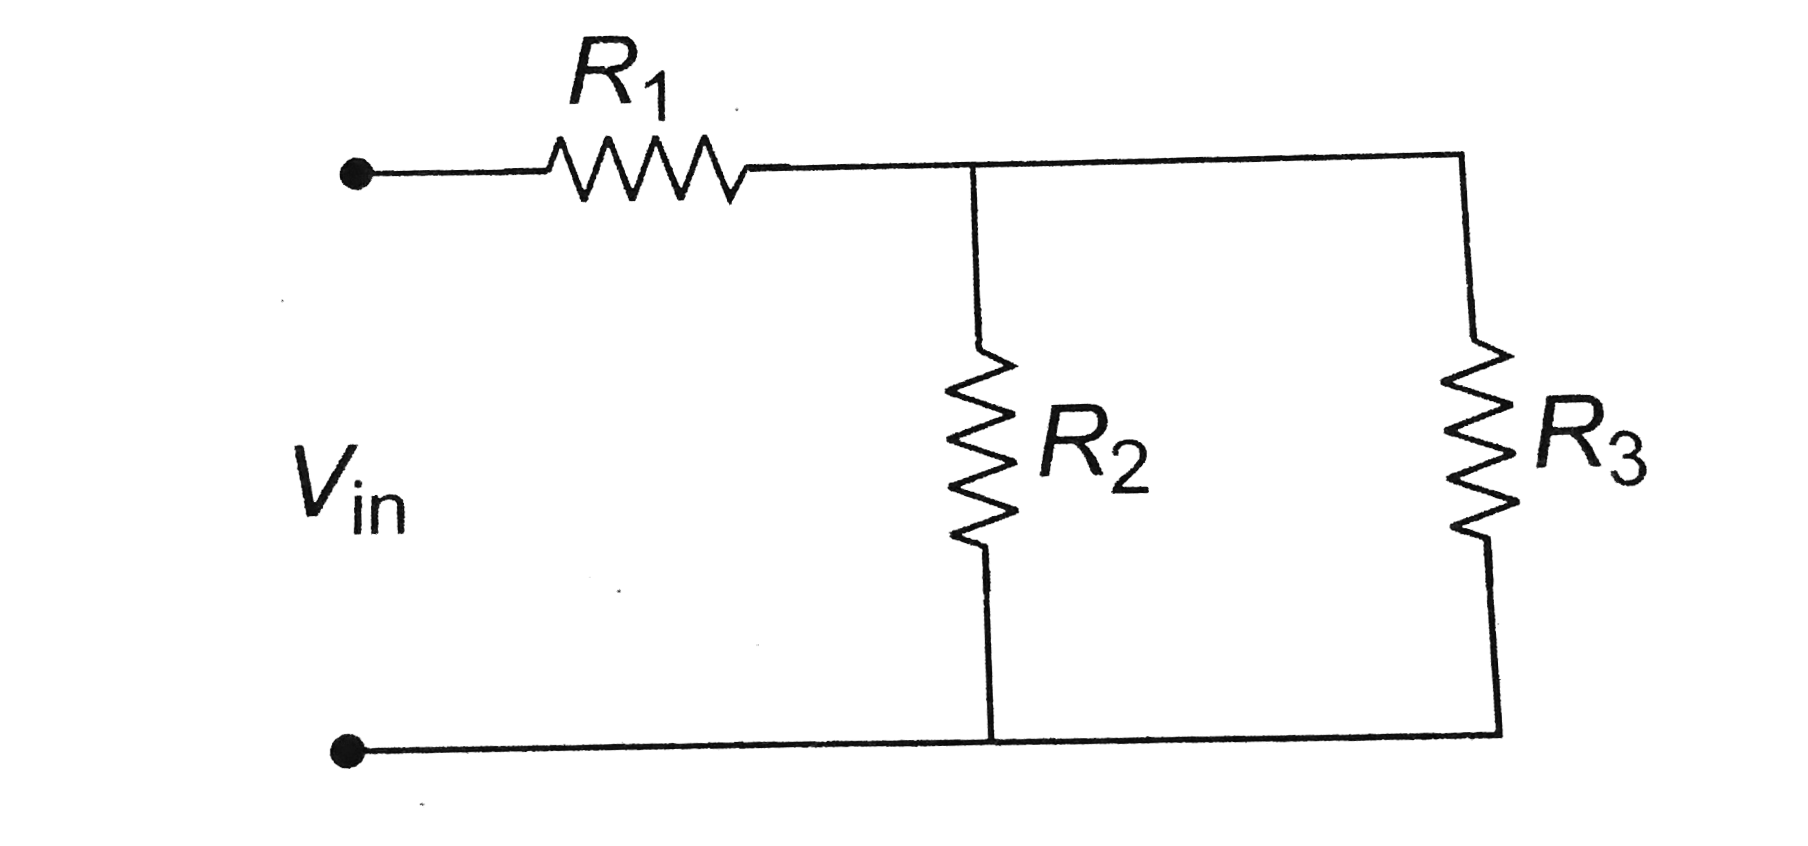 For ensuring dissipation of same energy in all three resistors (R(1), R(2), R(3)) connected as shown in figure, their values must be related as